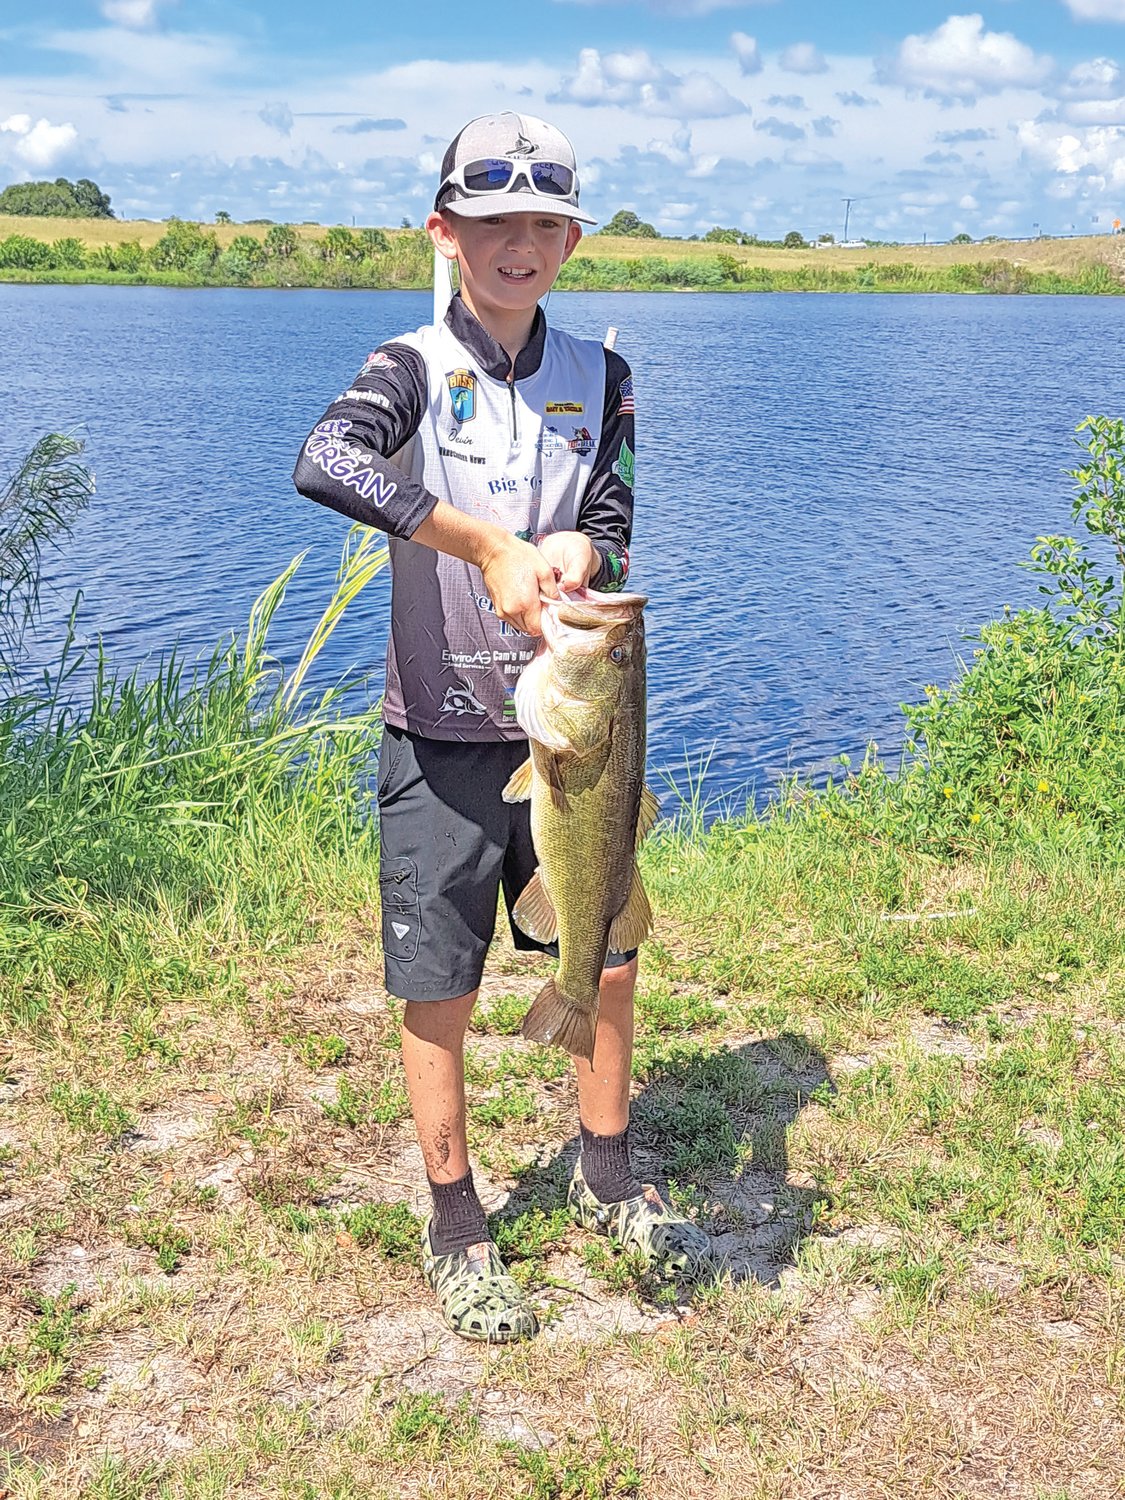 Devin Deihl placed first in the 9-13 Age Group with 7.45 pounds and Big Fish weighing 5.86 pounds.